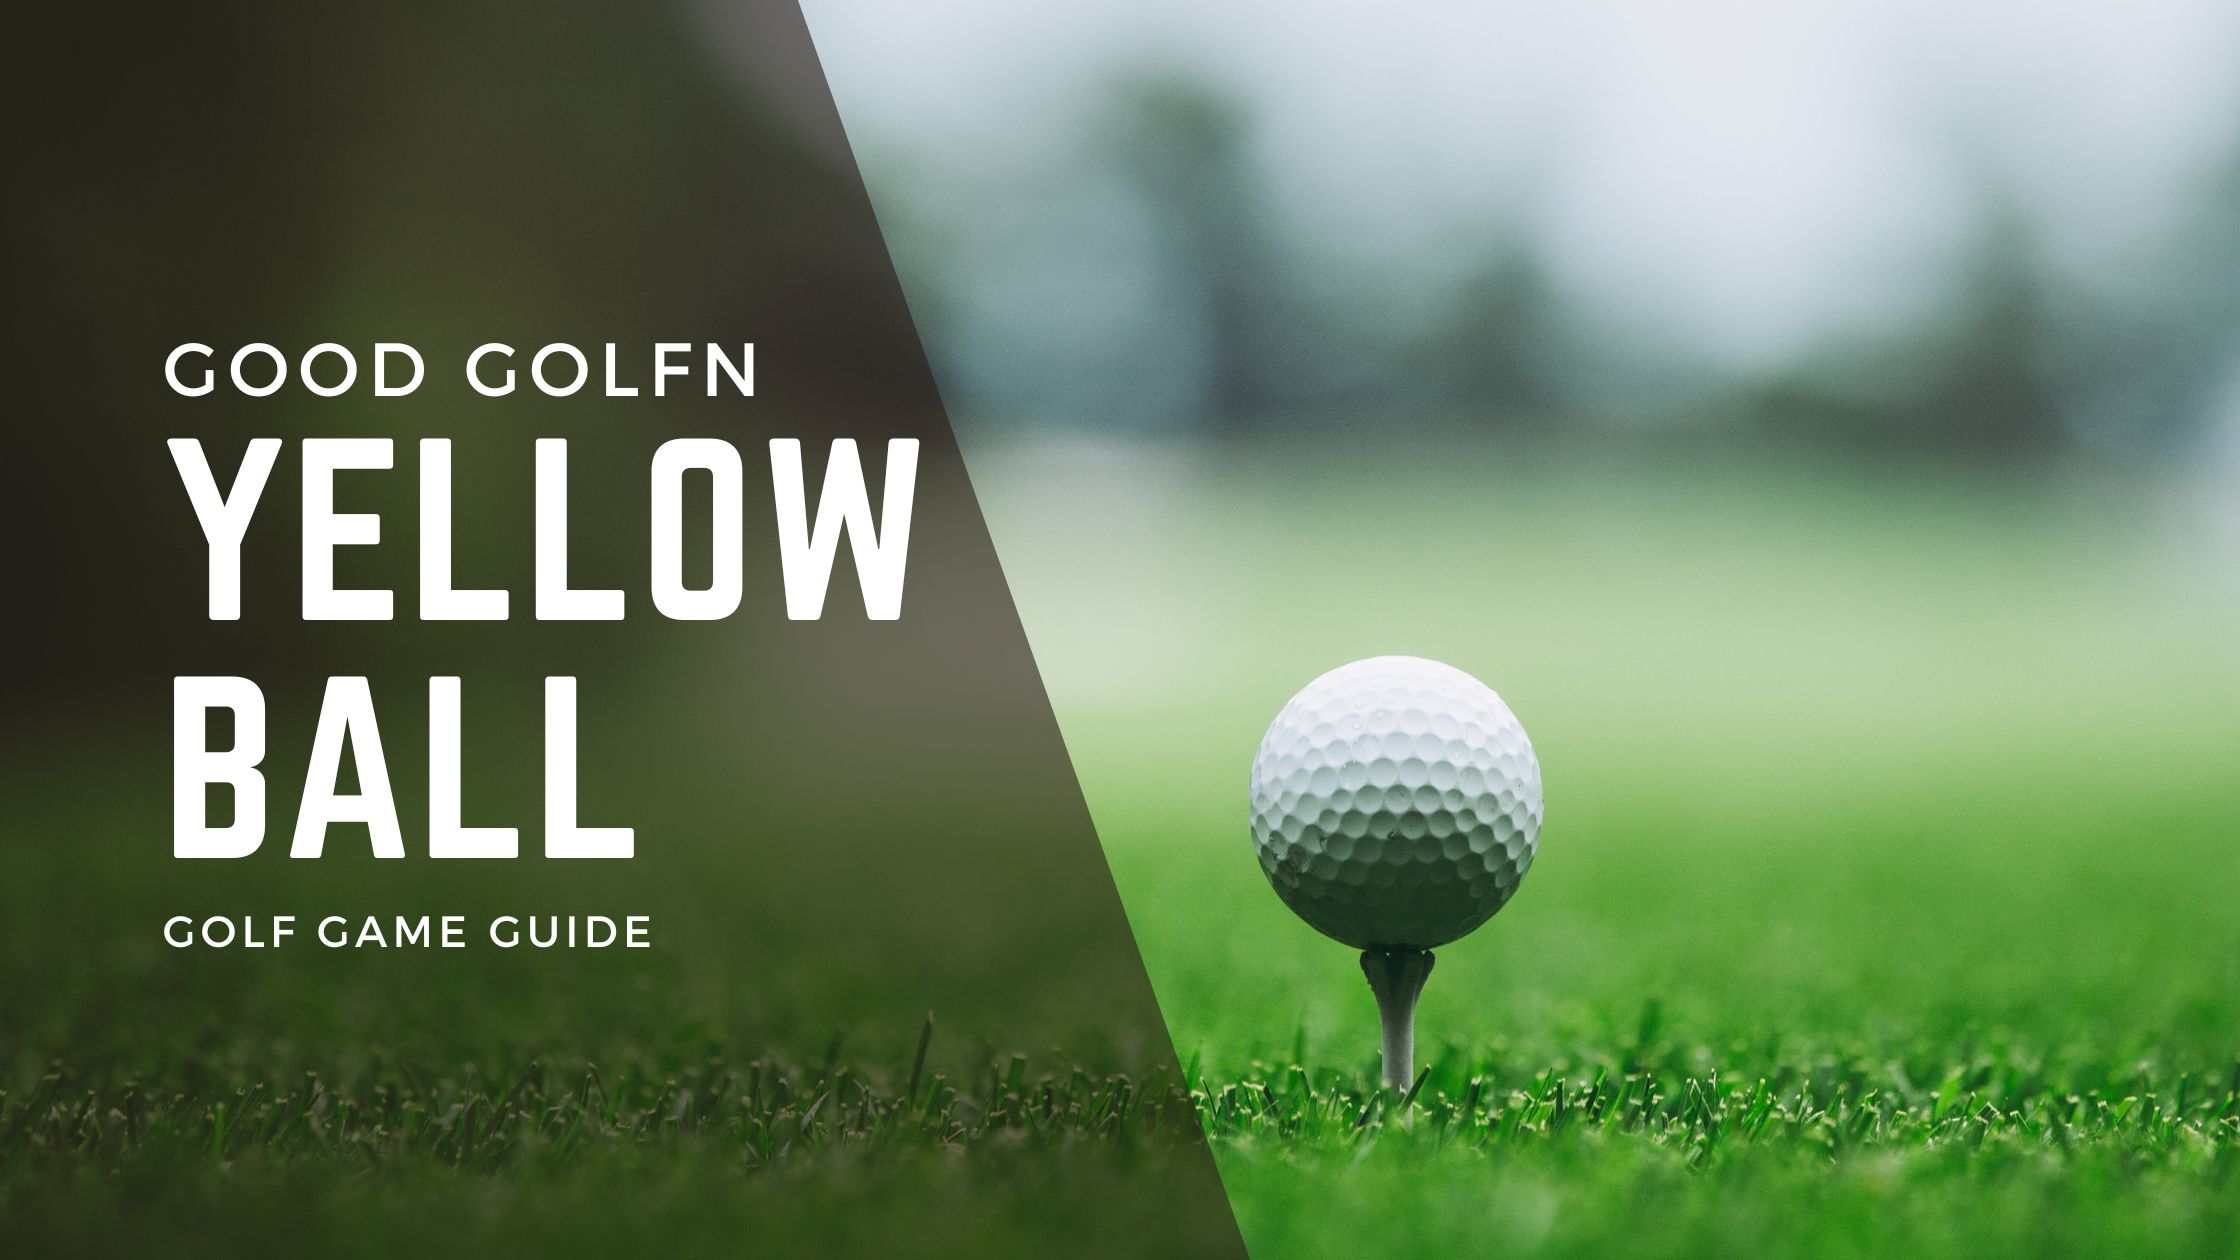 Discover the ins and outs of golf's unique formats like the yellow ball golf, money ball, and devil ball. Enhance your game and strategy.